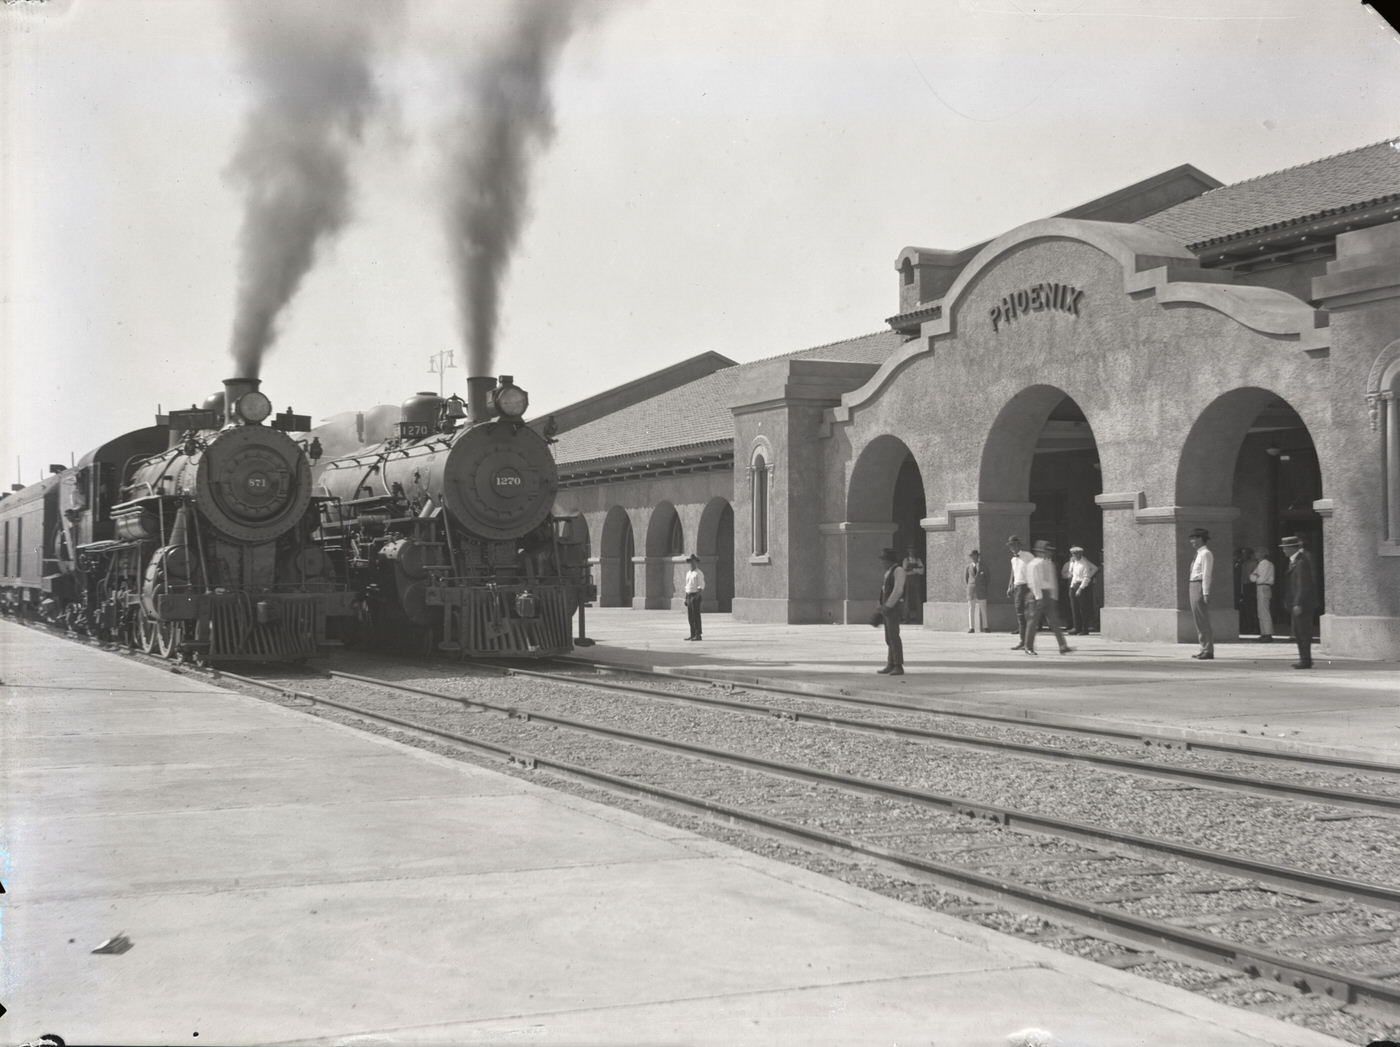 Union Station From the Rail Side, 1930s